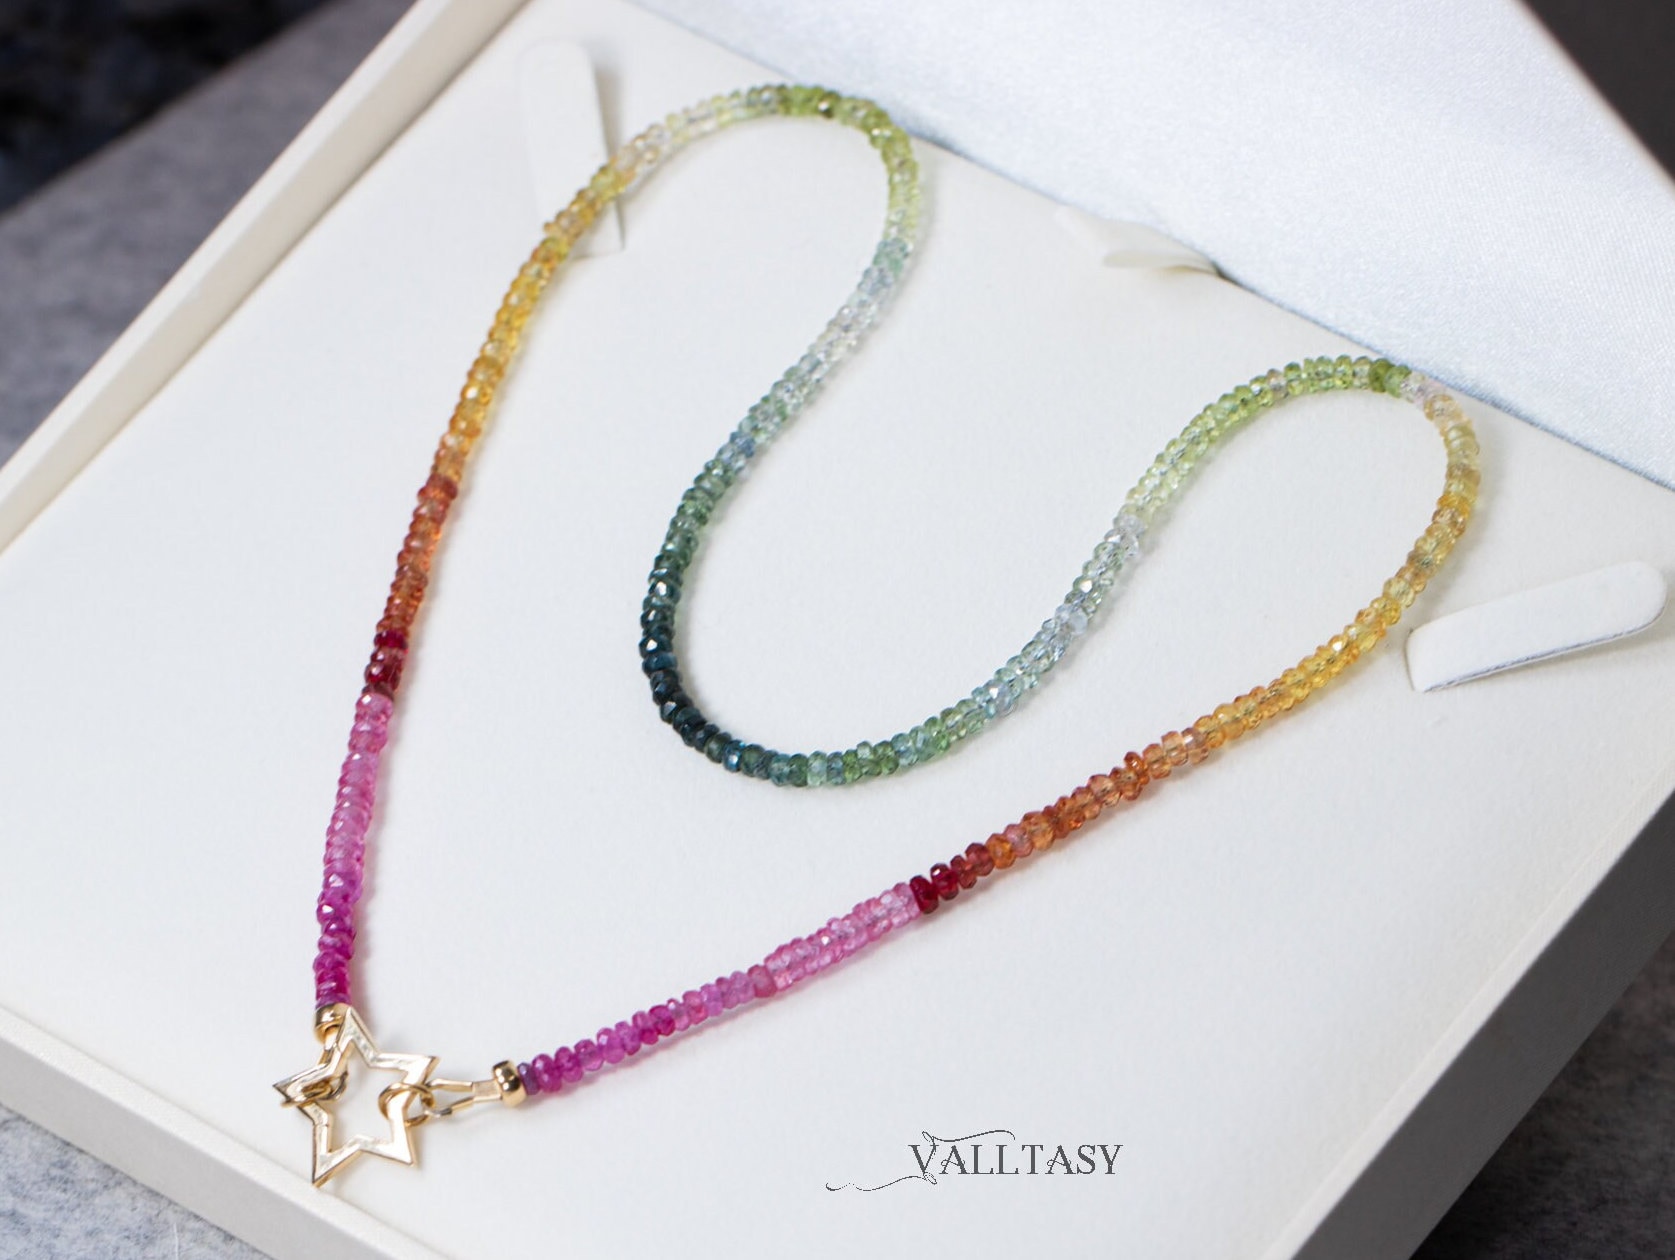 Solid Gold 14K Multi Sapphire Beaded Necklace with a Star Connector, Layering Rainbow Sapphire Necklace